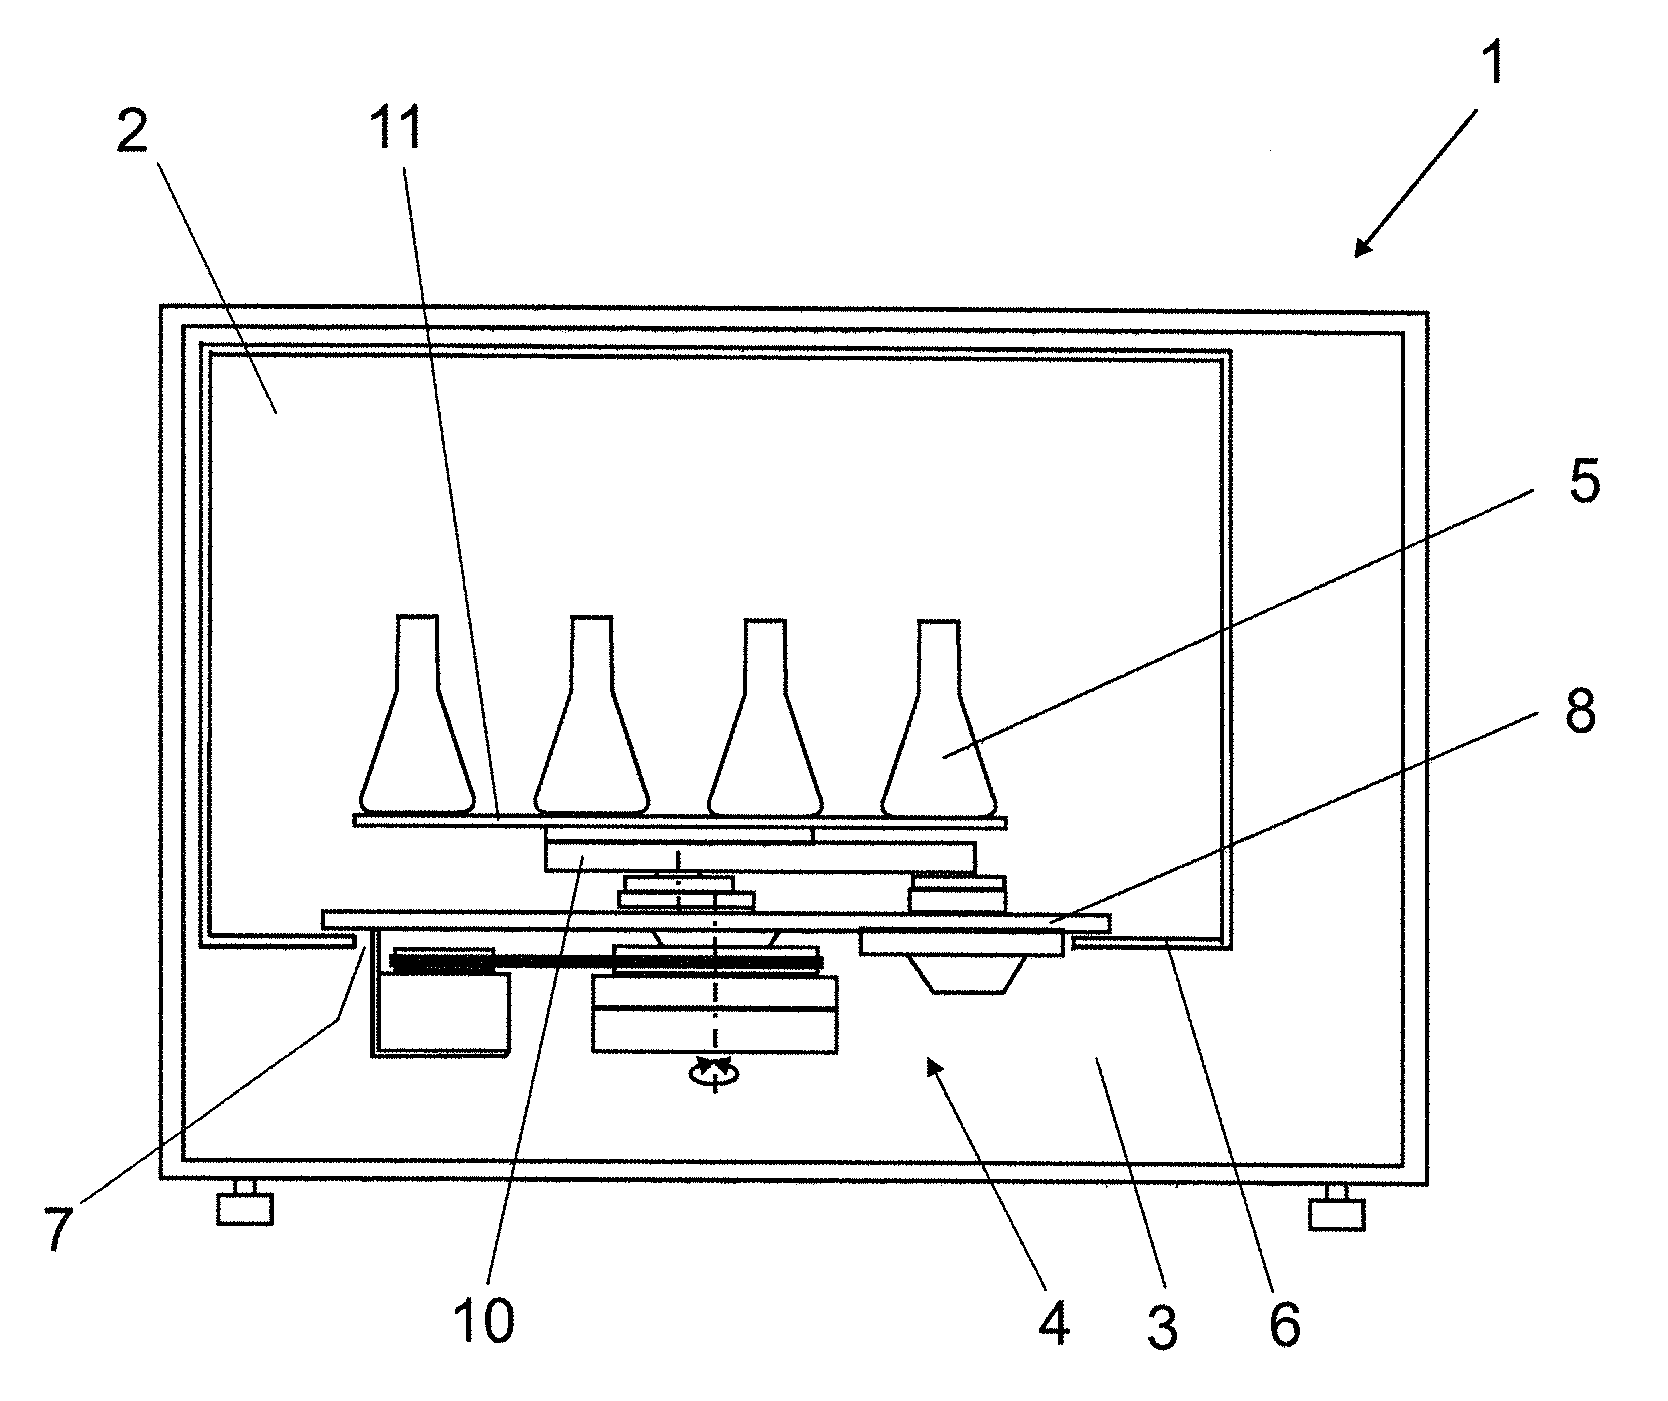 Incubator comprising a shaking device